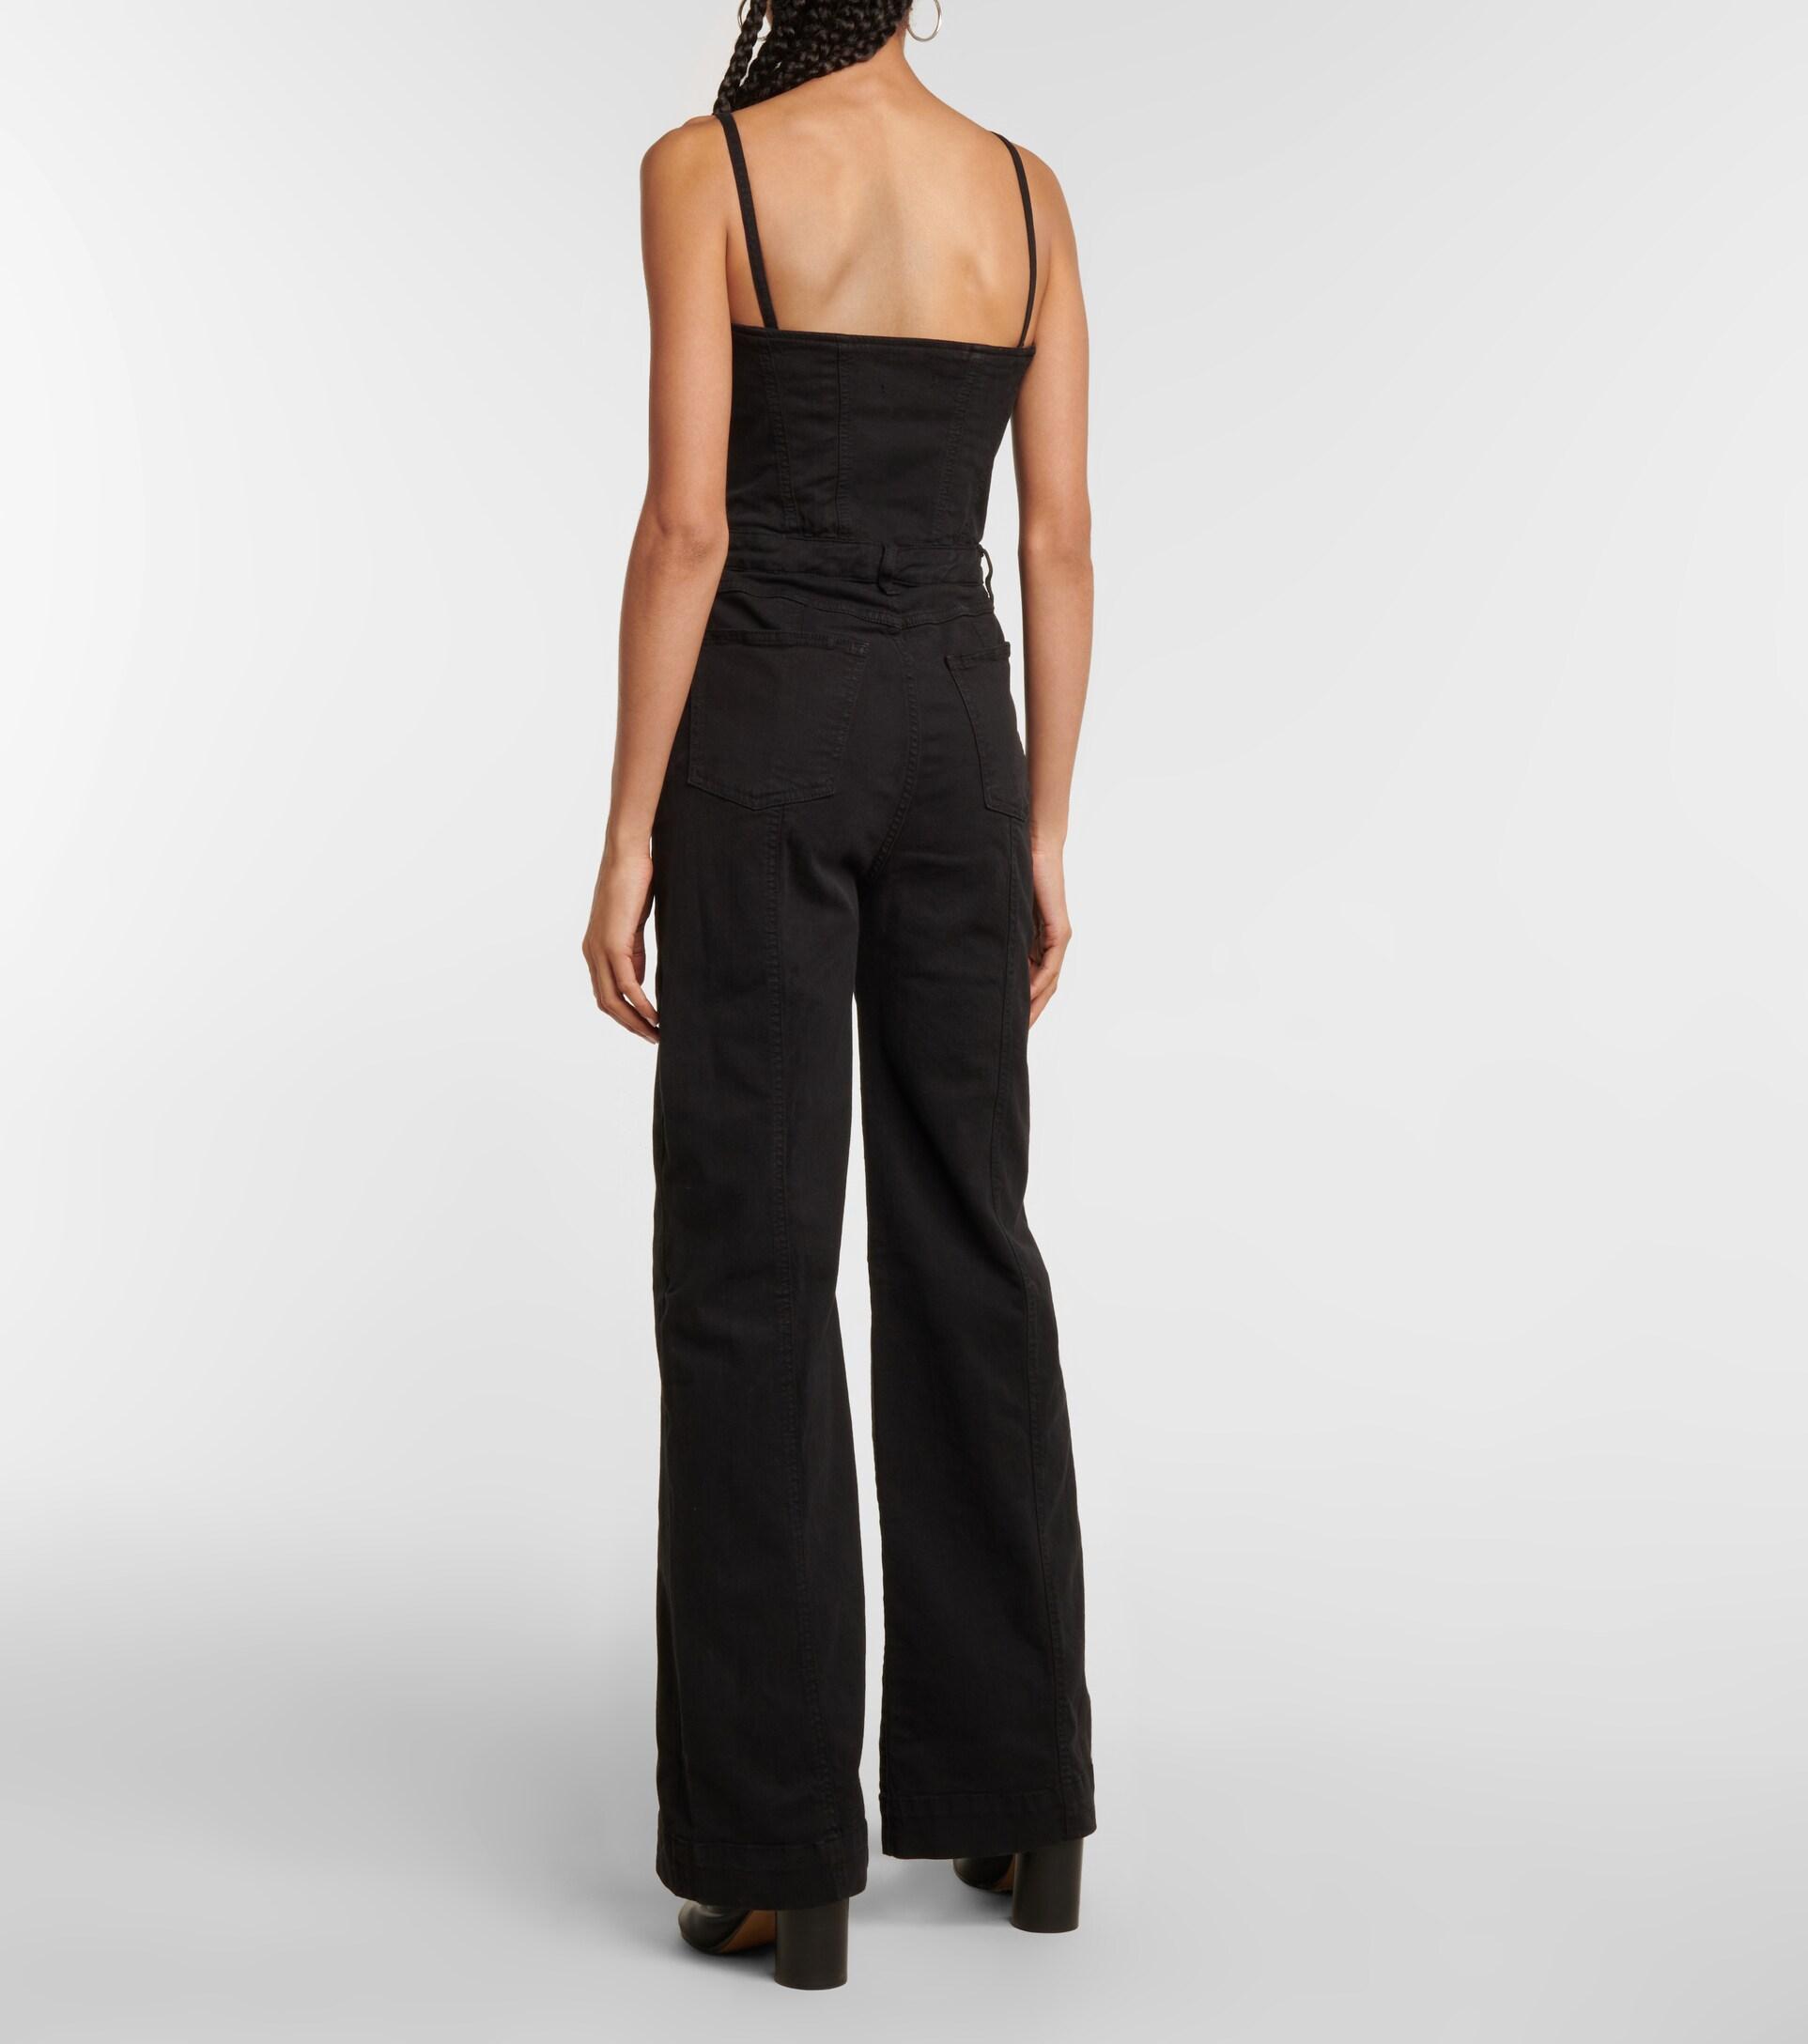 Womens Jumpsuits and rompers 7 For All Mankind Jumpsuits and rompers 7 For All Mankind Bustier Denim Jumpsuit in Black 